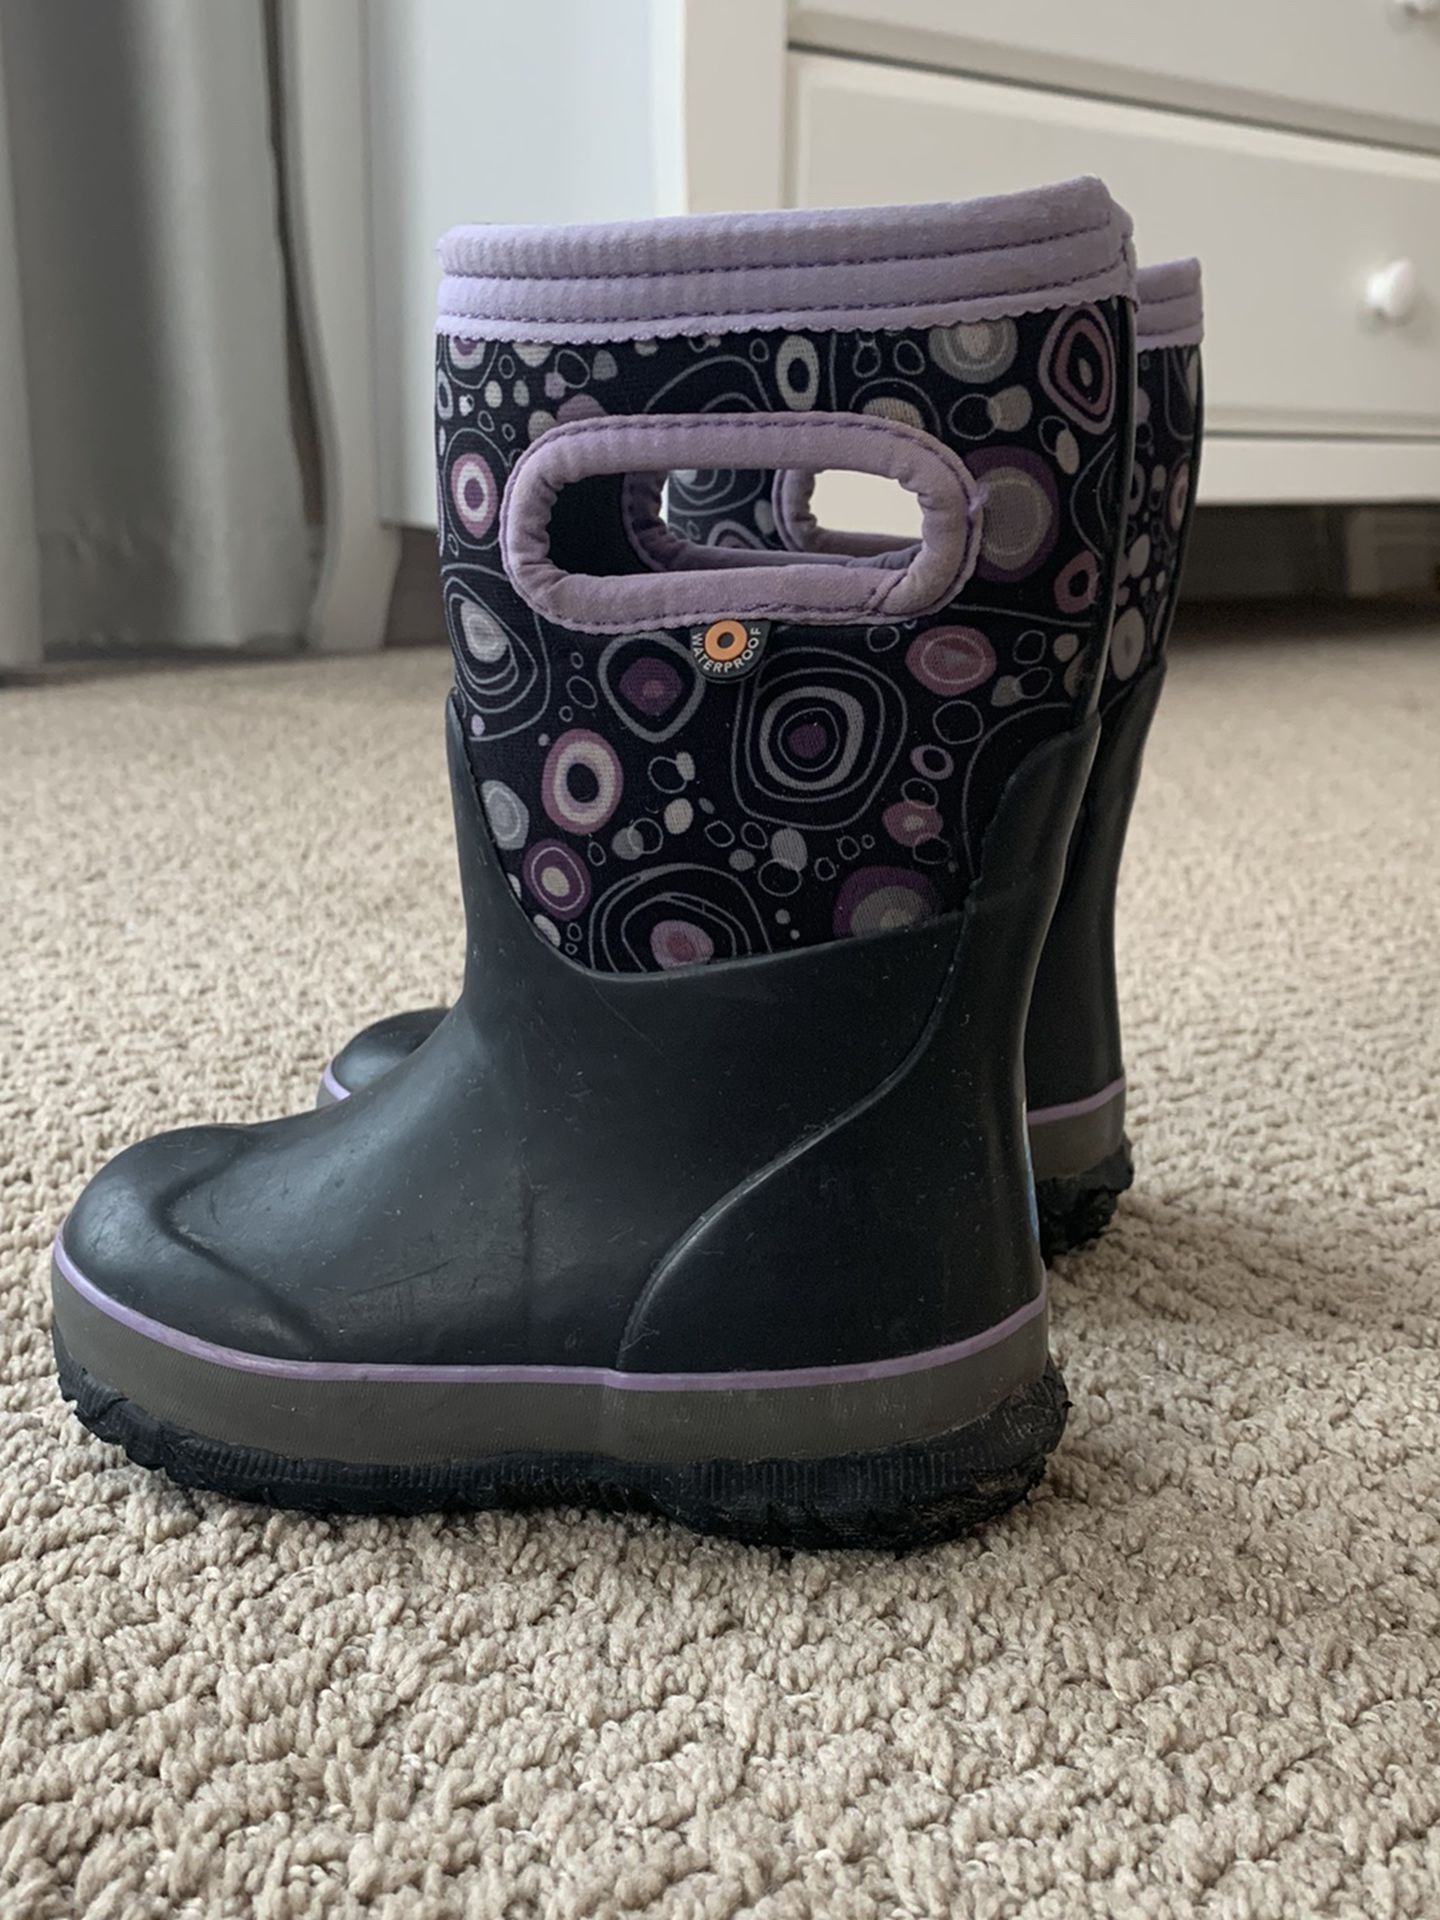 Rain/snow Toddle Boots Size 8